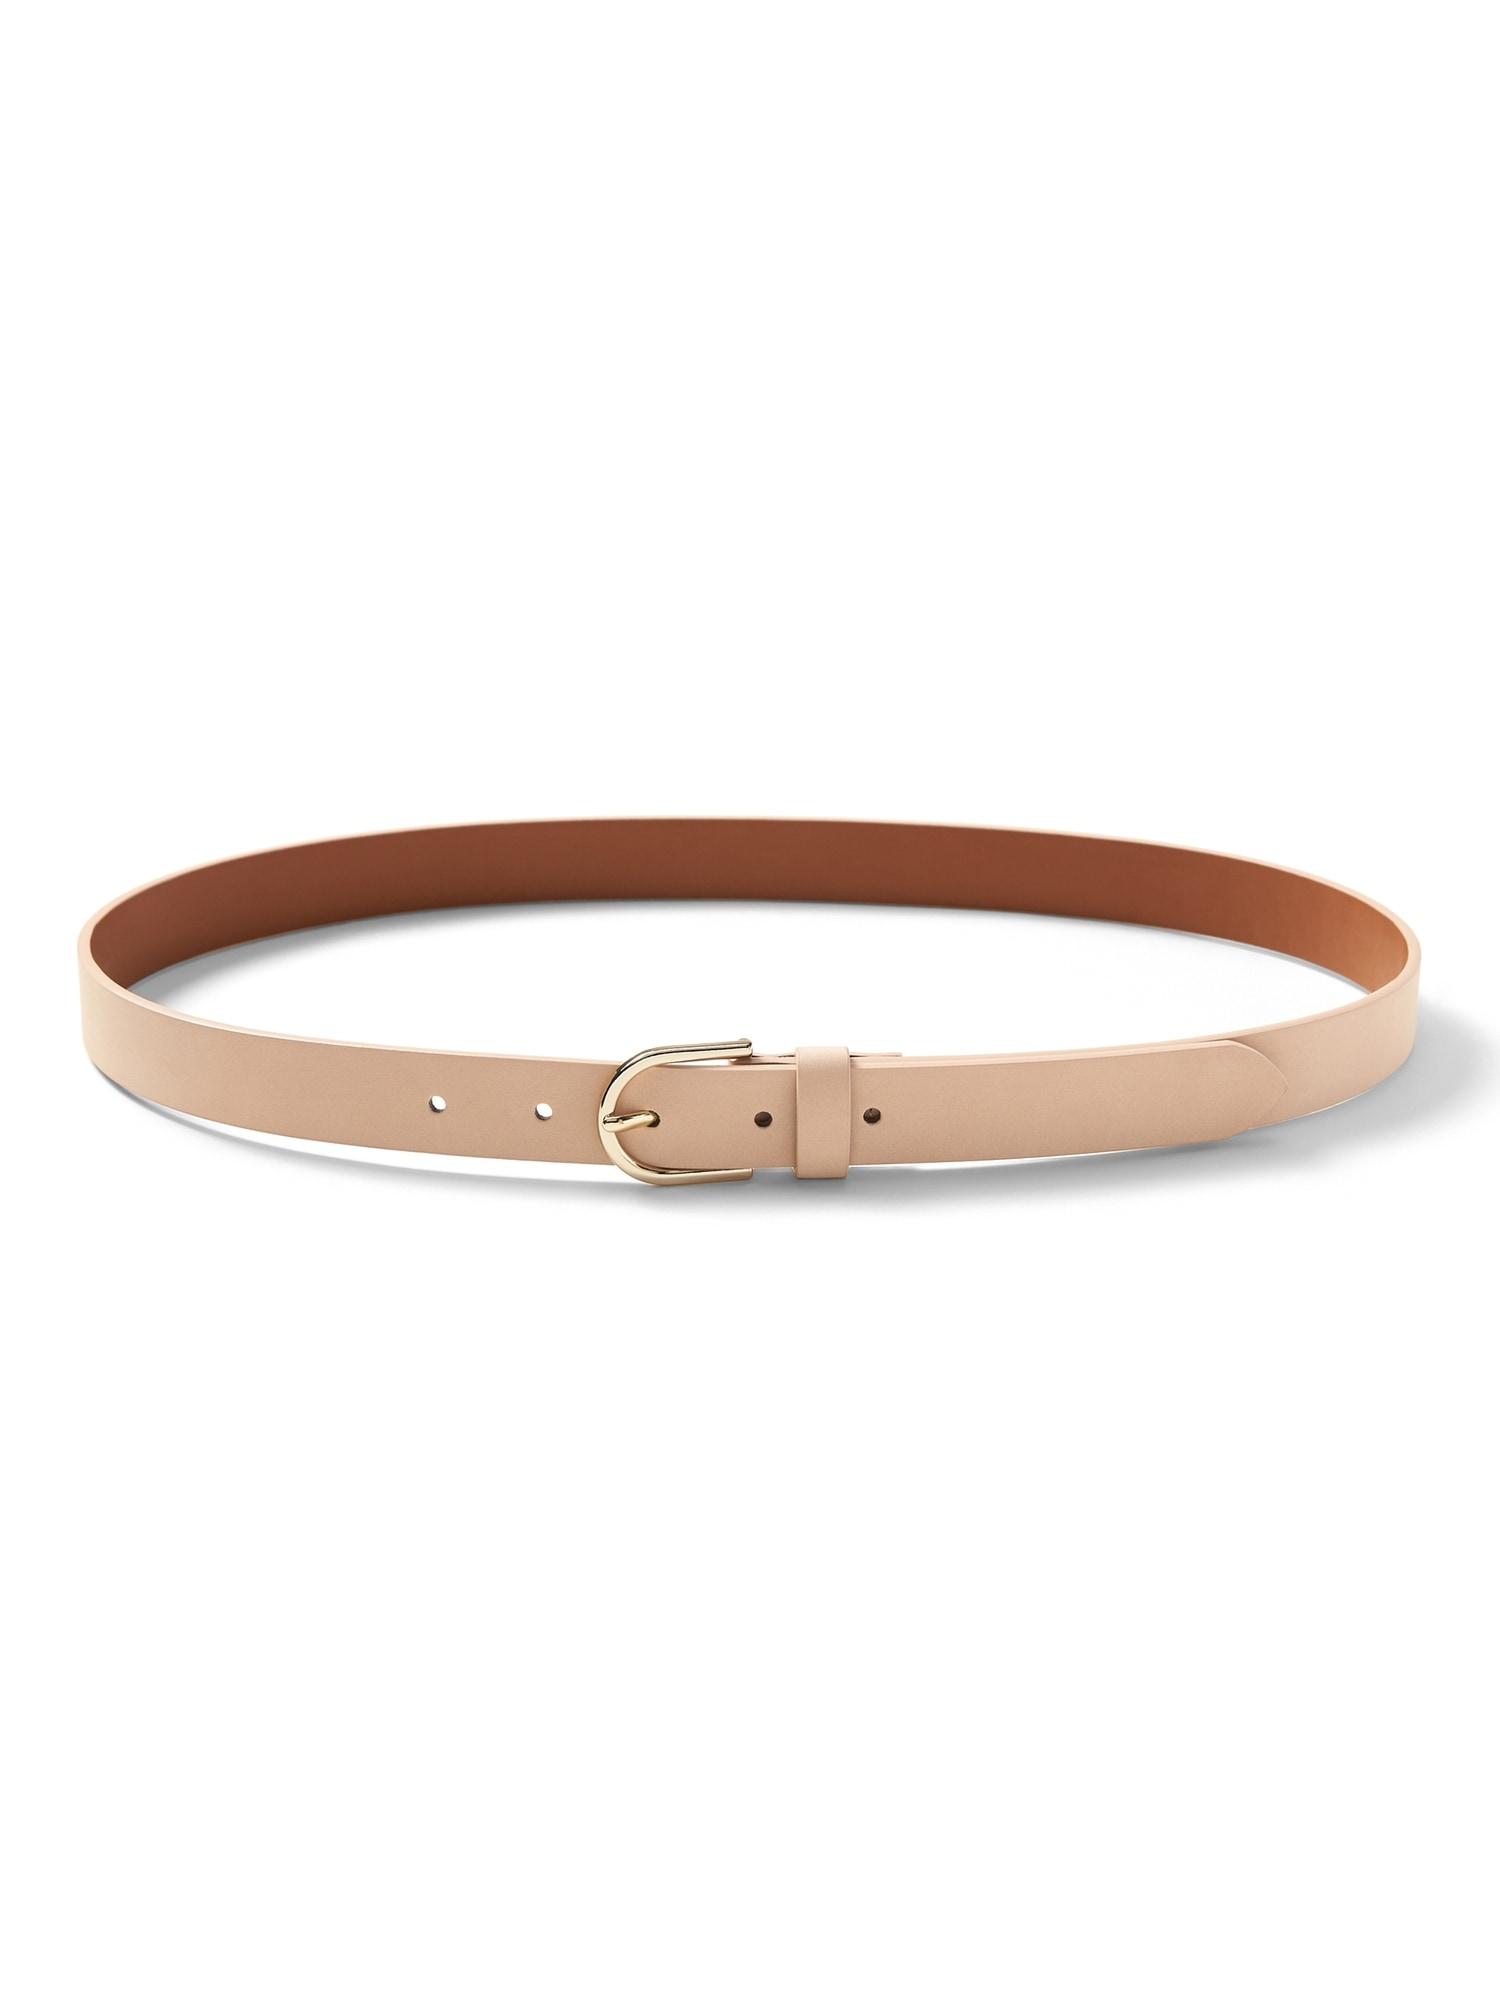 Banana Republic Leather Trouser Belt in Blush Pink (Brown) - Lyst